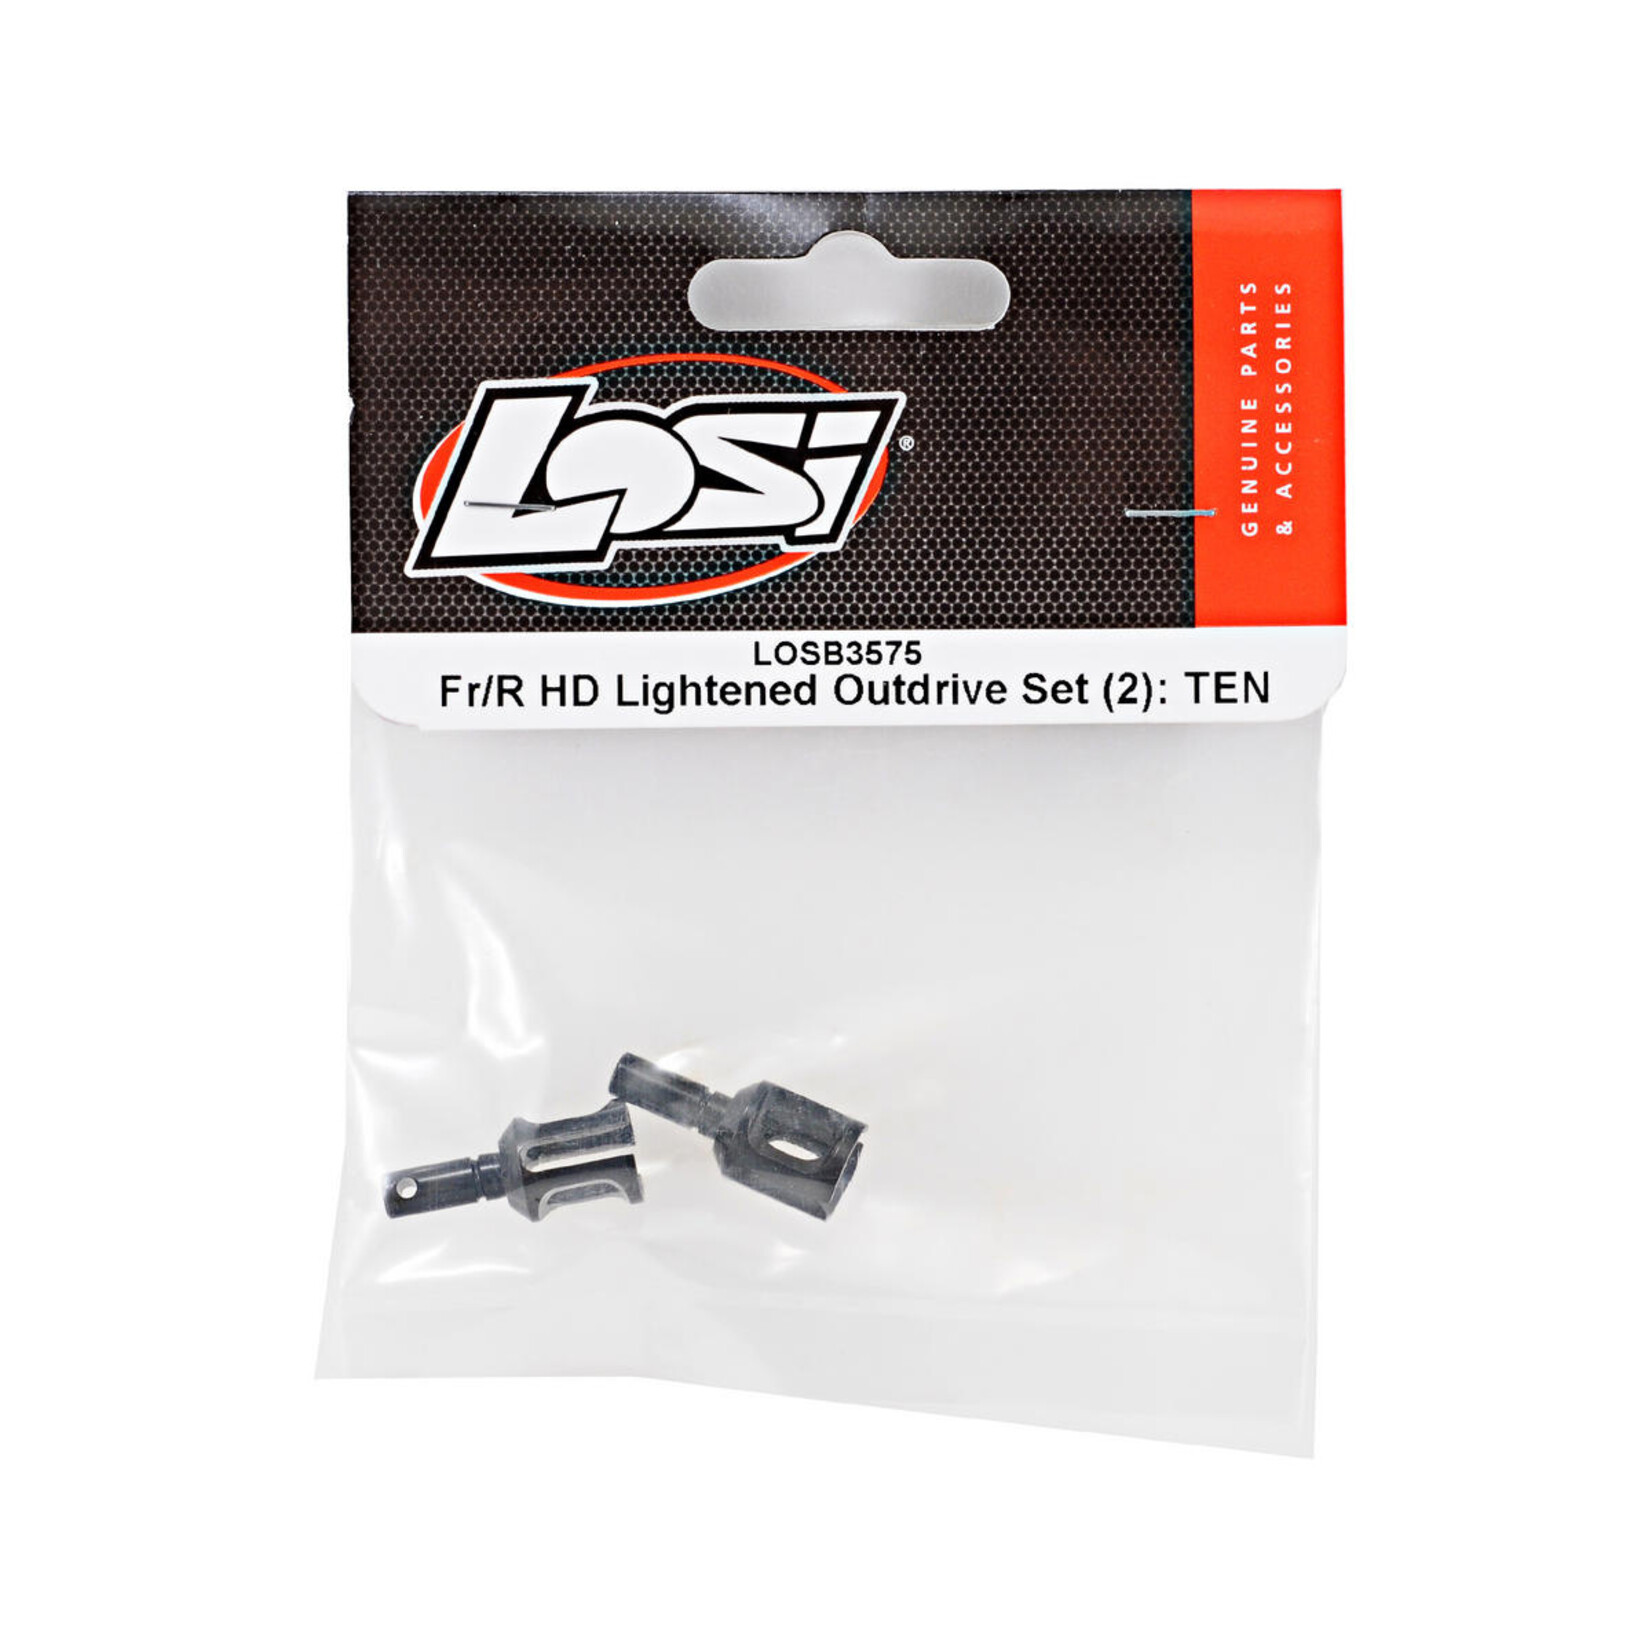 Losi Losi Front/Rear HD Lightened Outdrive Set (2) #LOSB3575